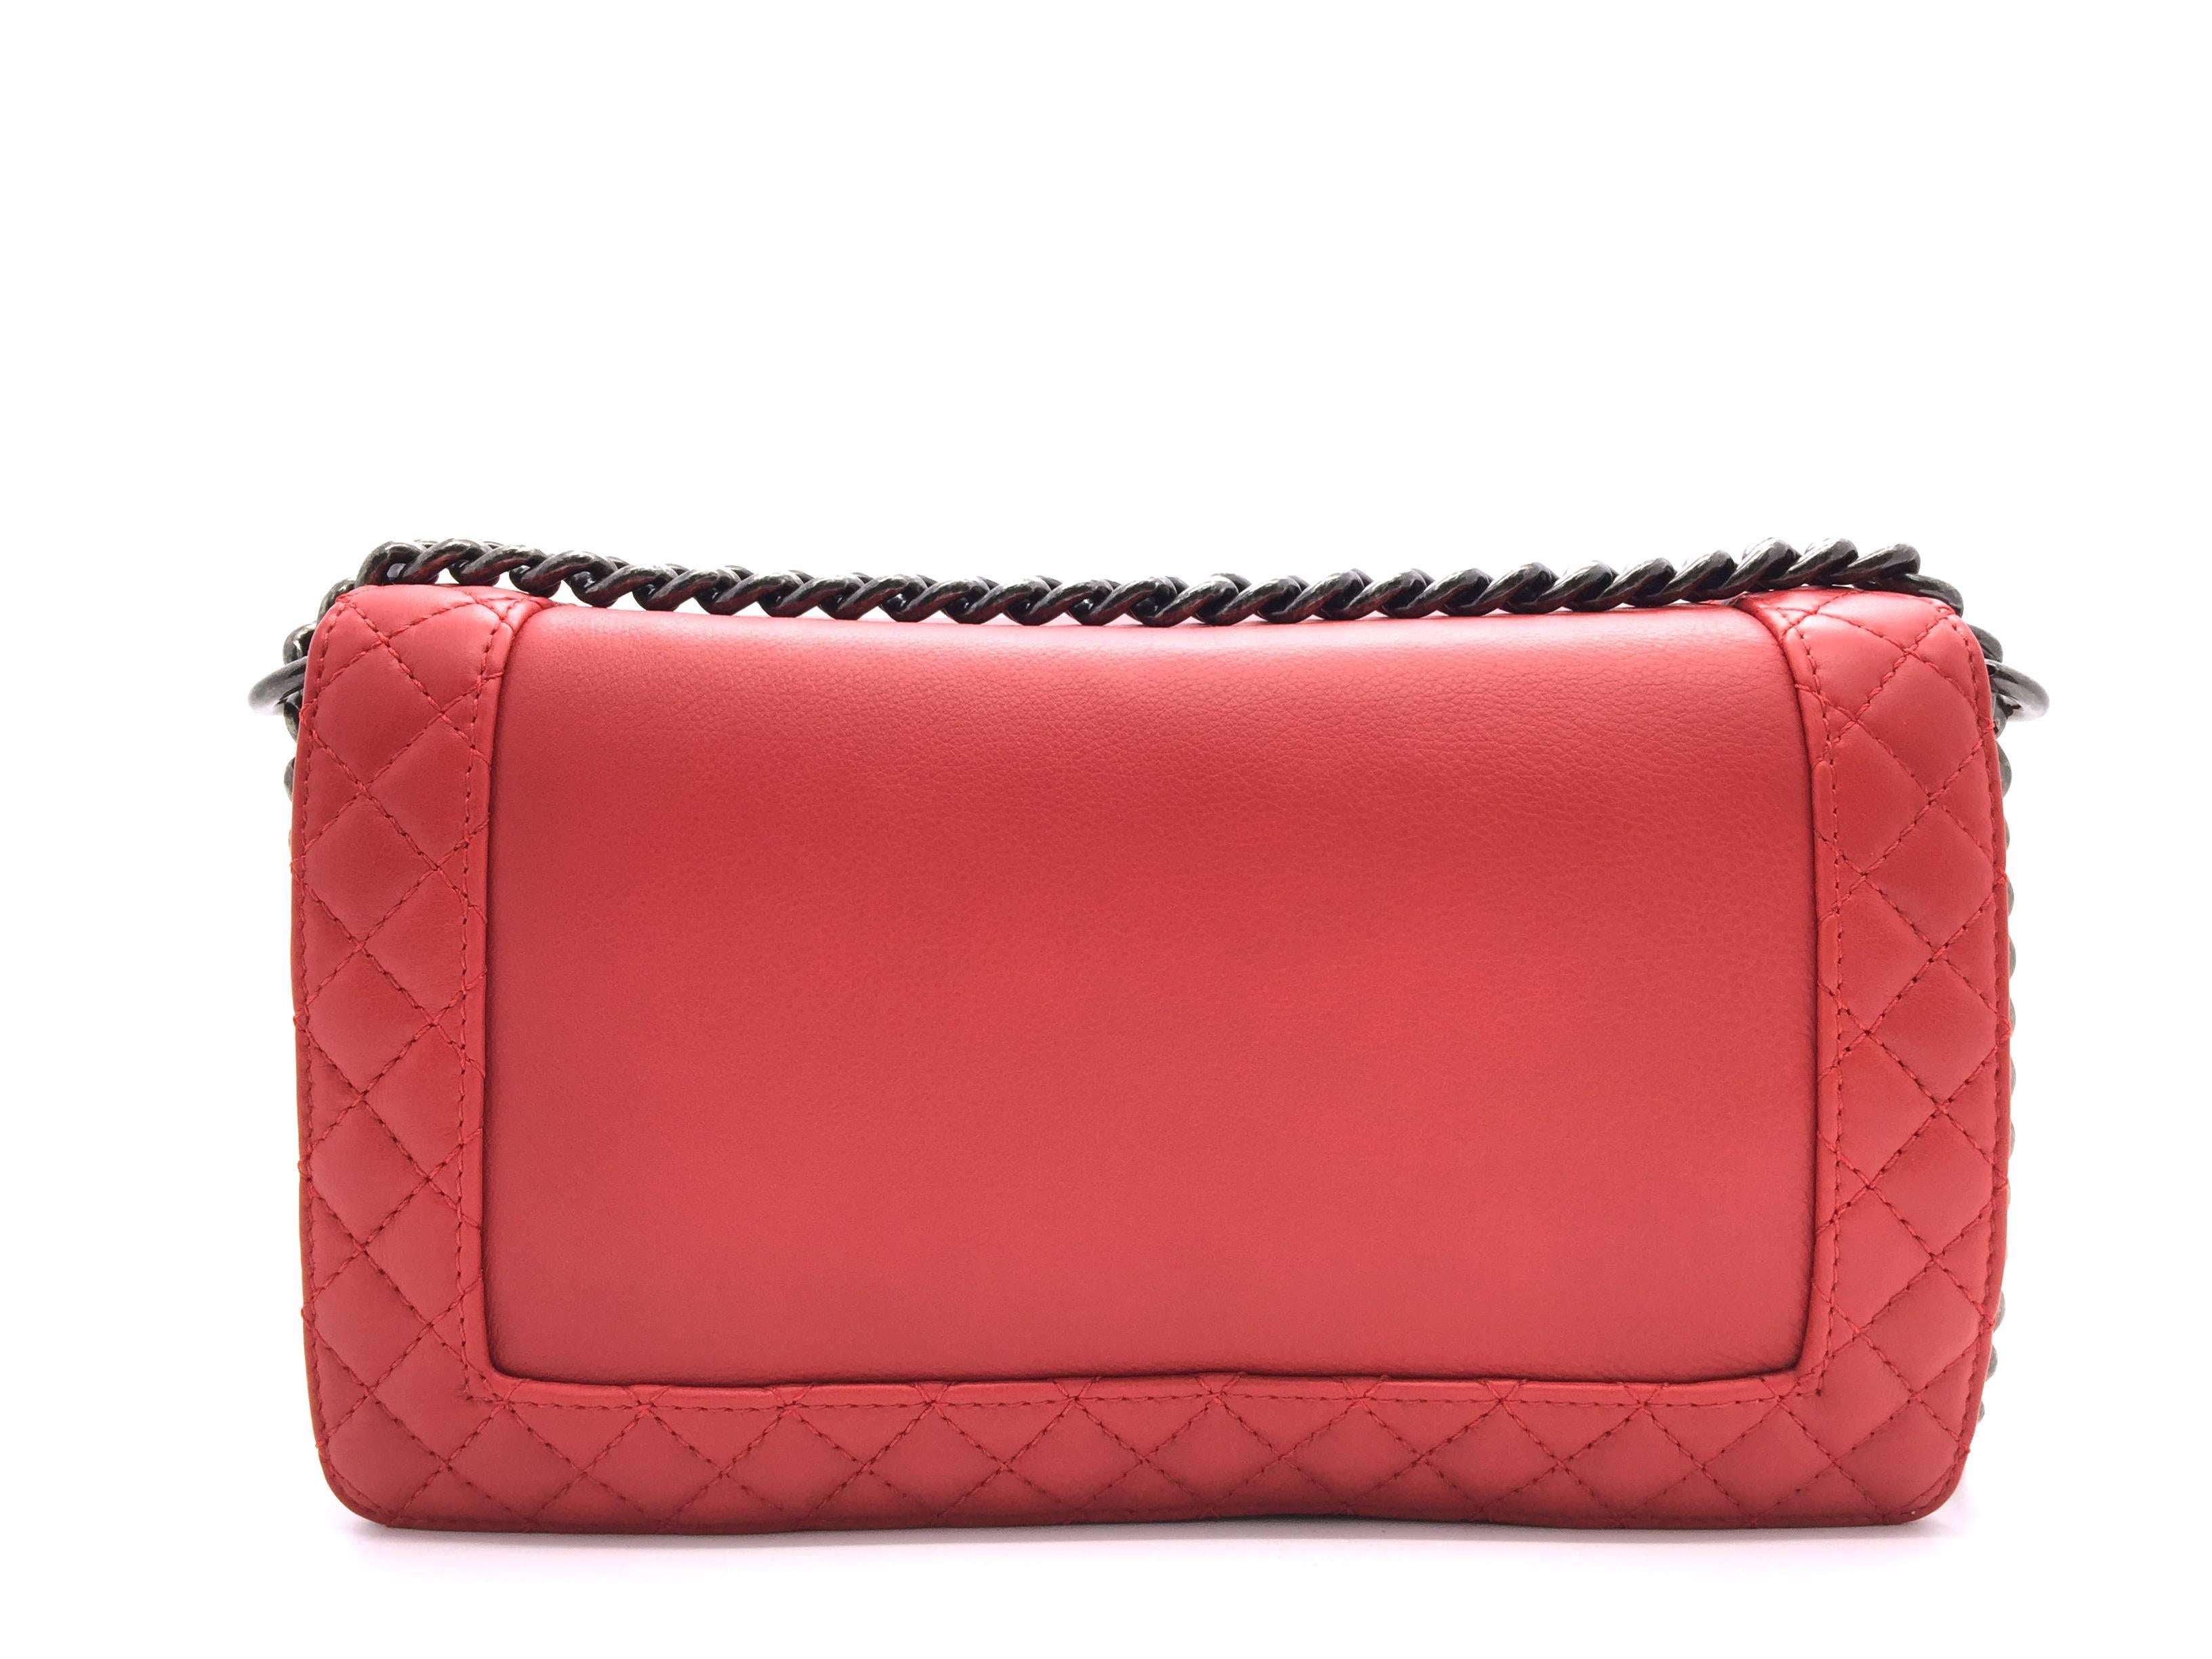 Women's Chanel Boy Reverso Red Quilted Lambskin Leather SHW Chain Shoulder Bag